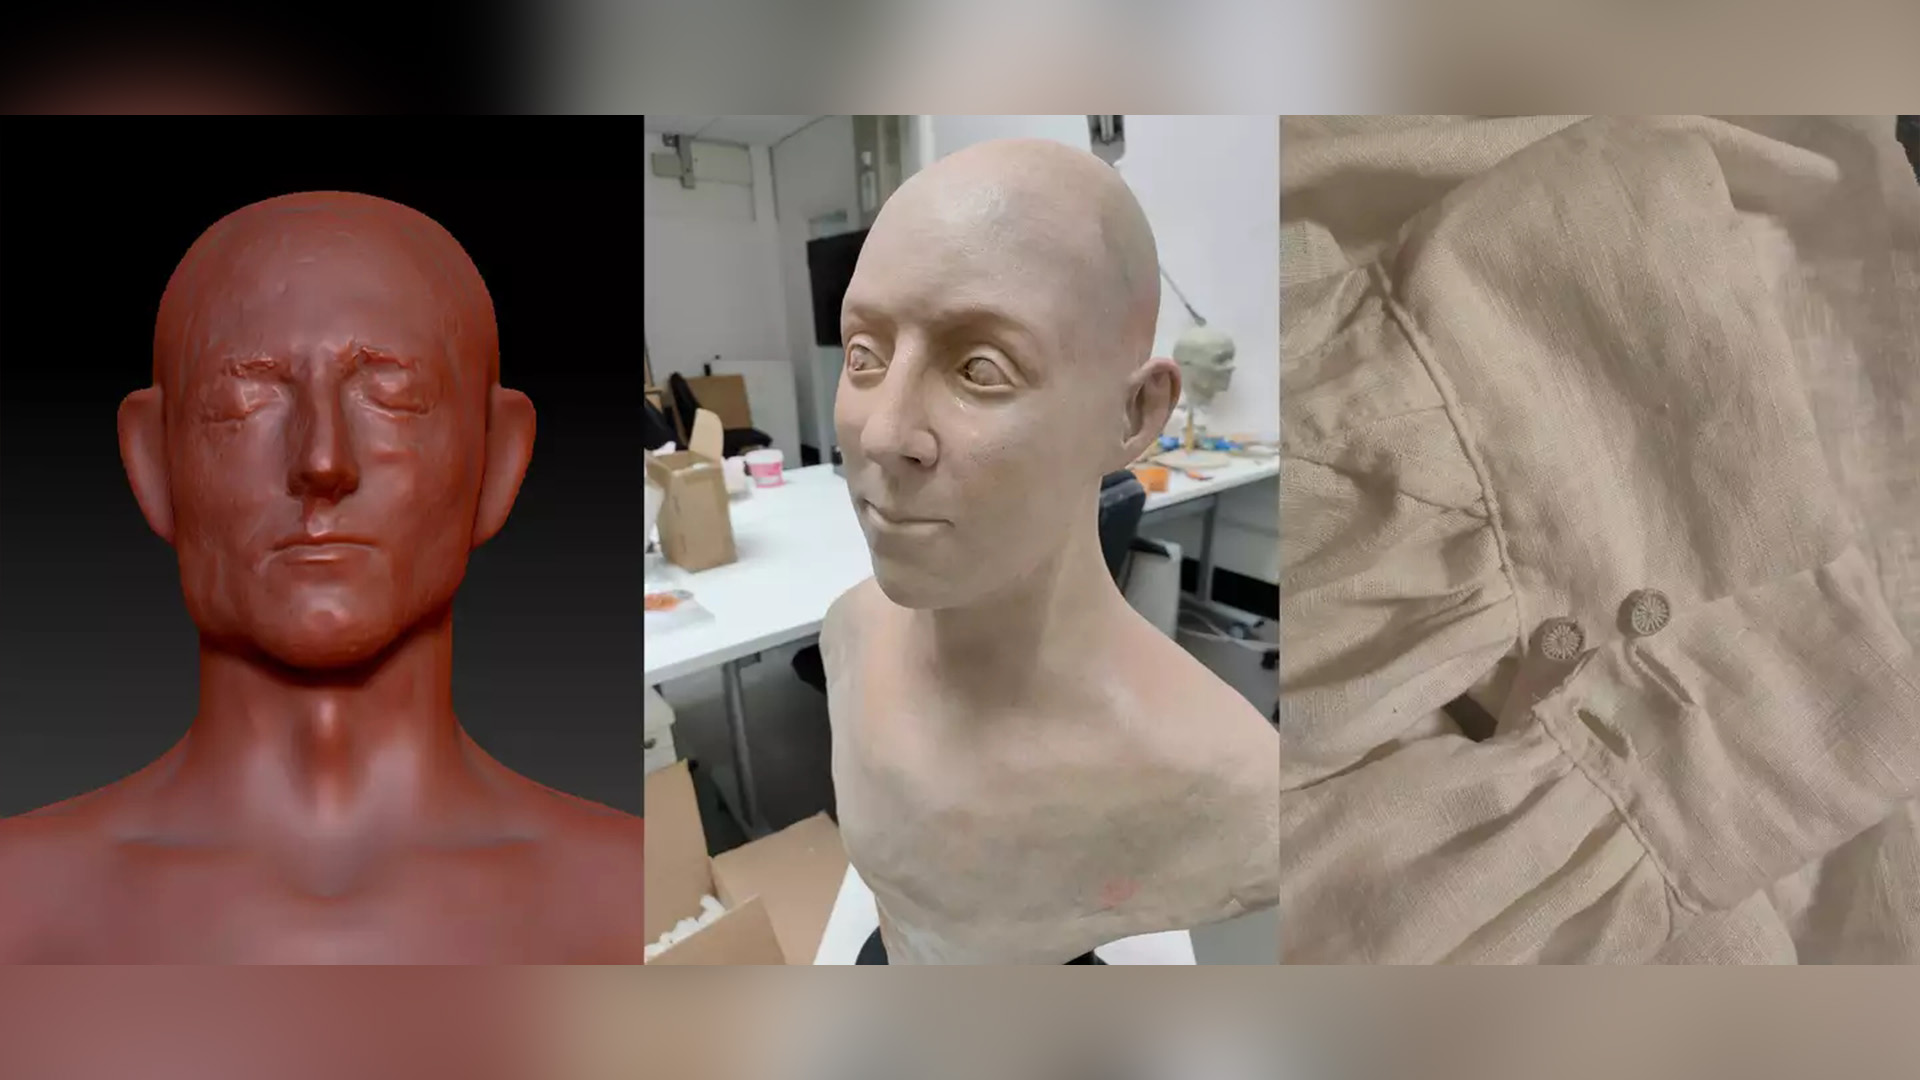 The researchers analyzed death masks made of the prince soon after his death in 1788, then applied anti-aging software to estimate his appearance more than 40 years earlier.